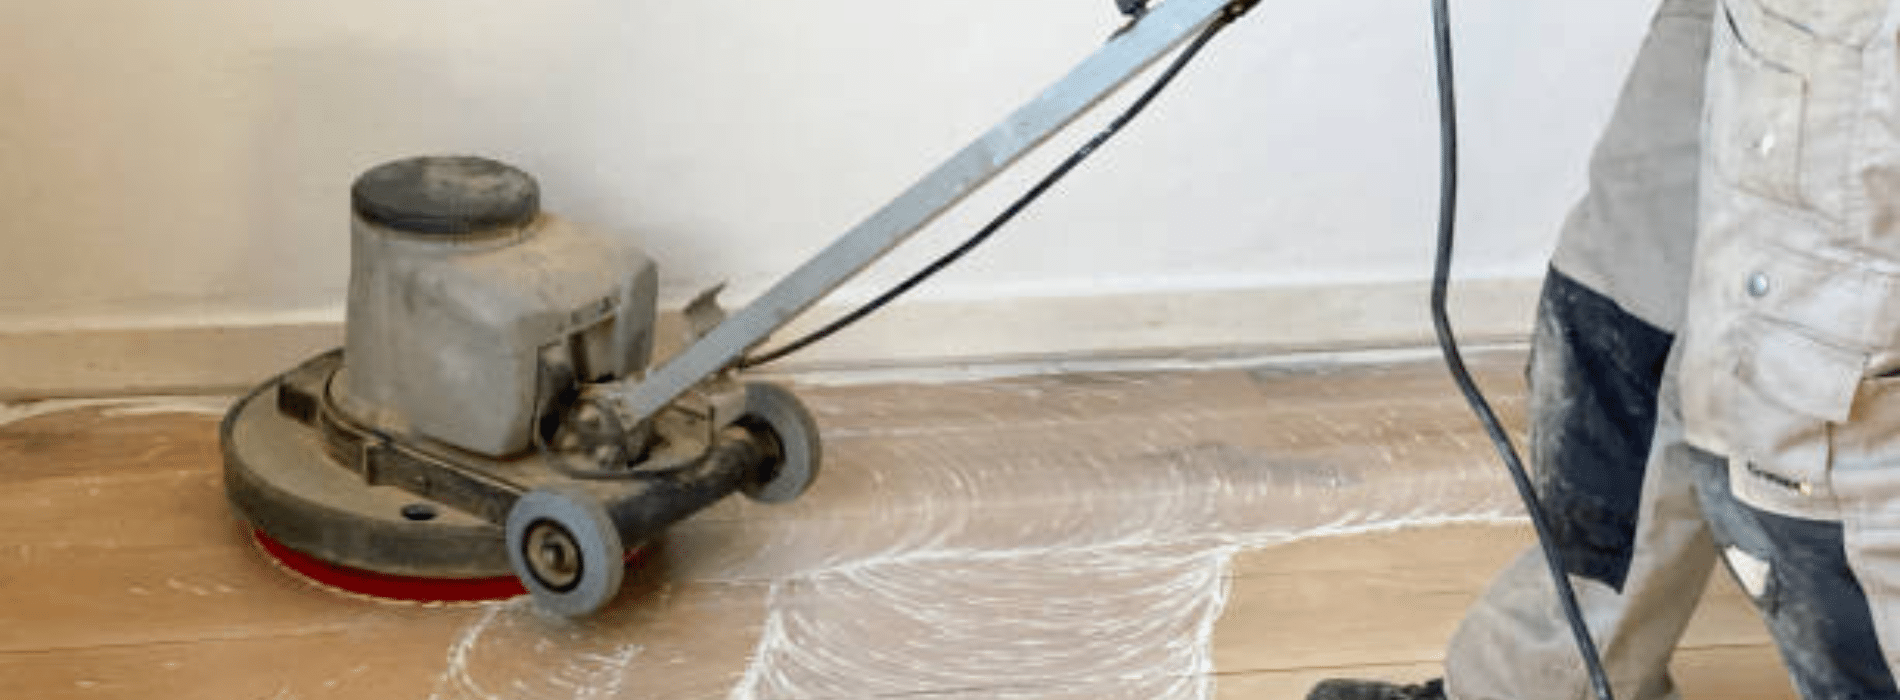 Mr Sander® skillfully sanding a herringbone floor with a Effect 2200, Voltage 220, Frequency 60 Bona belt sander. Experience their expertise and attention to detail in achieving outstanding results.